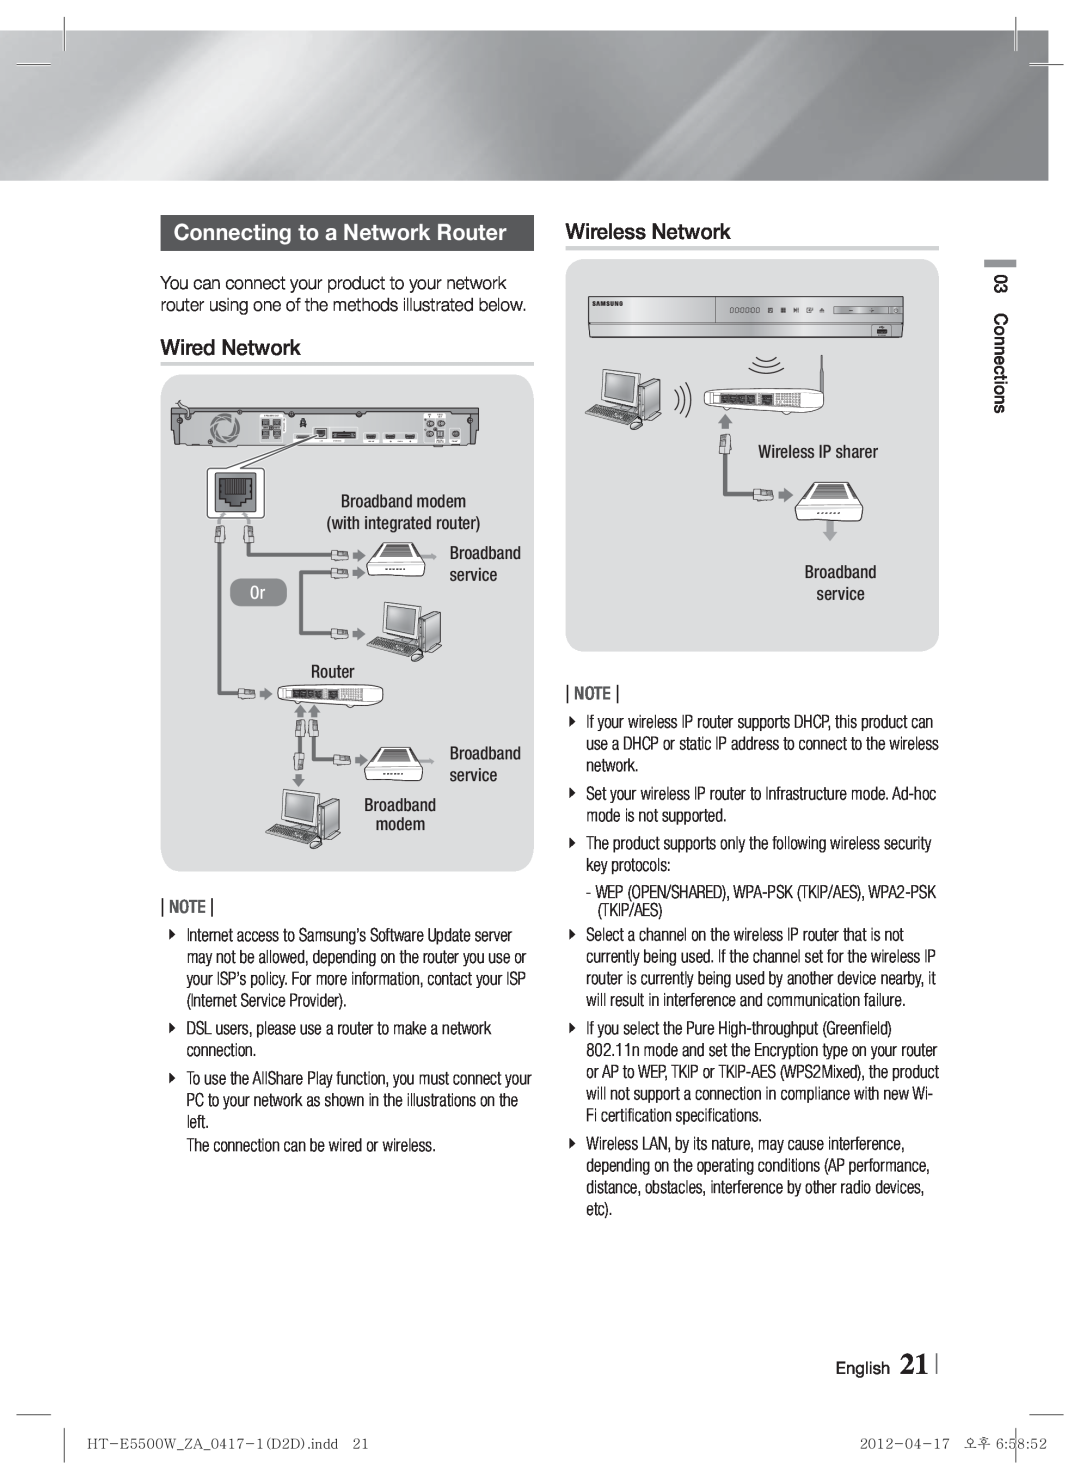 Samsung HT-E550 user manual Connecting to a Network Router, Wireless Network, Note 